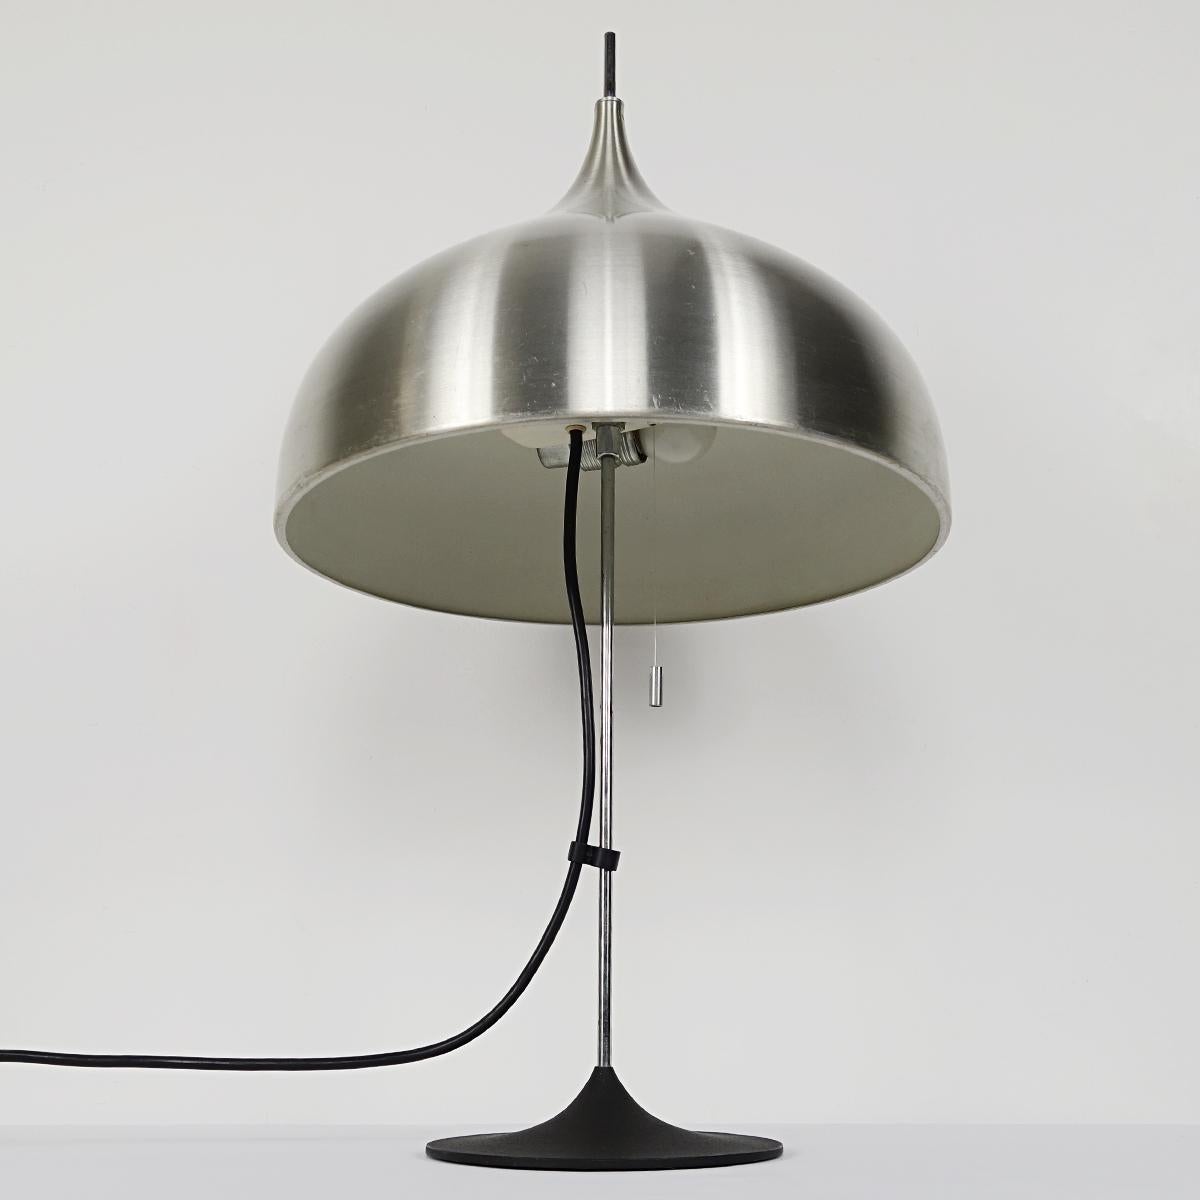 German Mid-Century Modern Silver Colored Mushroom Shaped Table Lamp by Doria For Sale